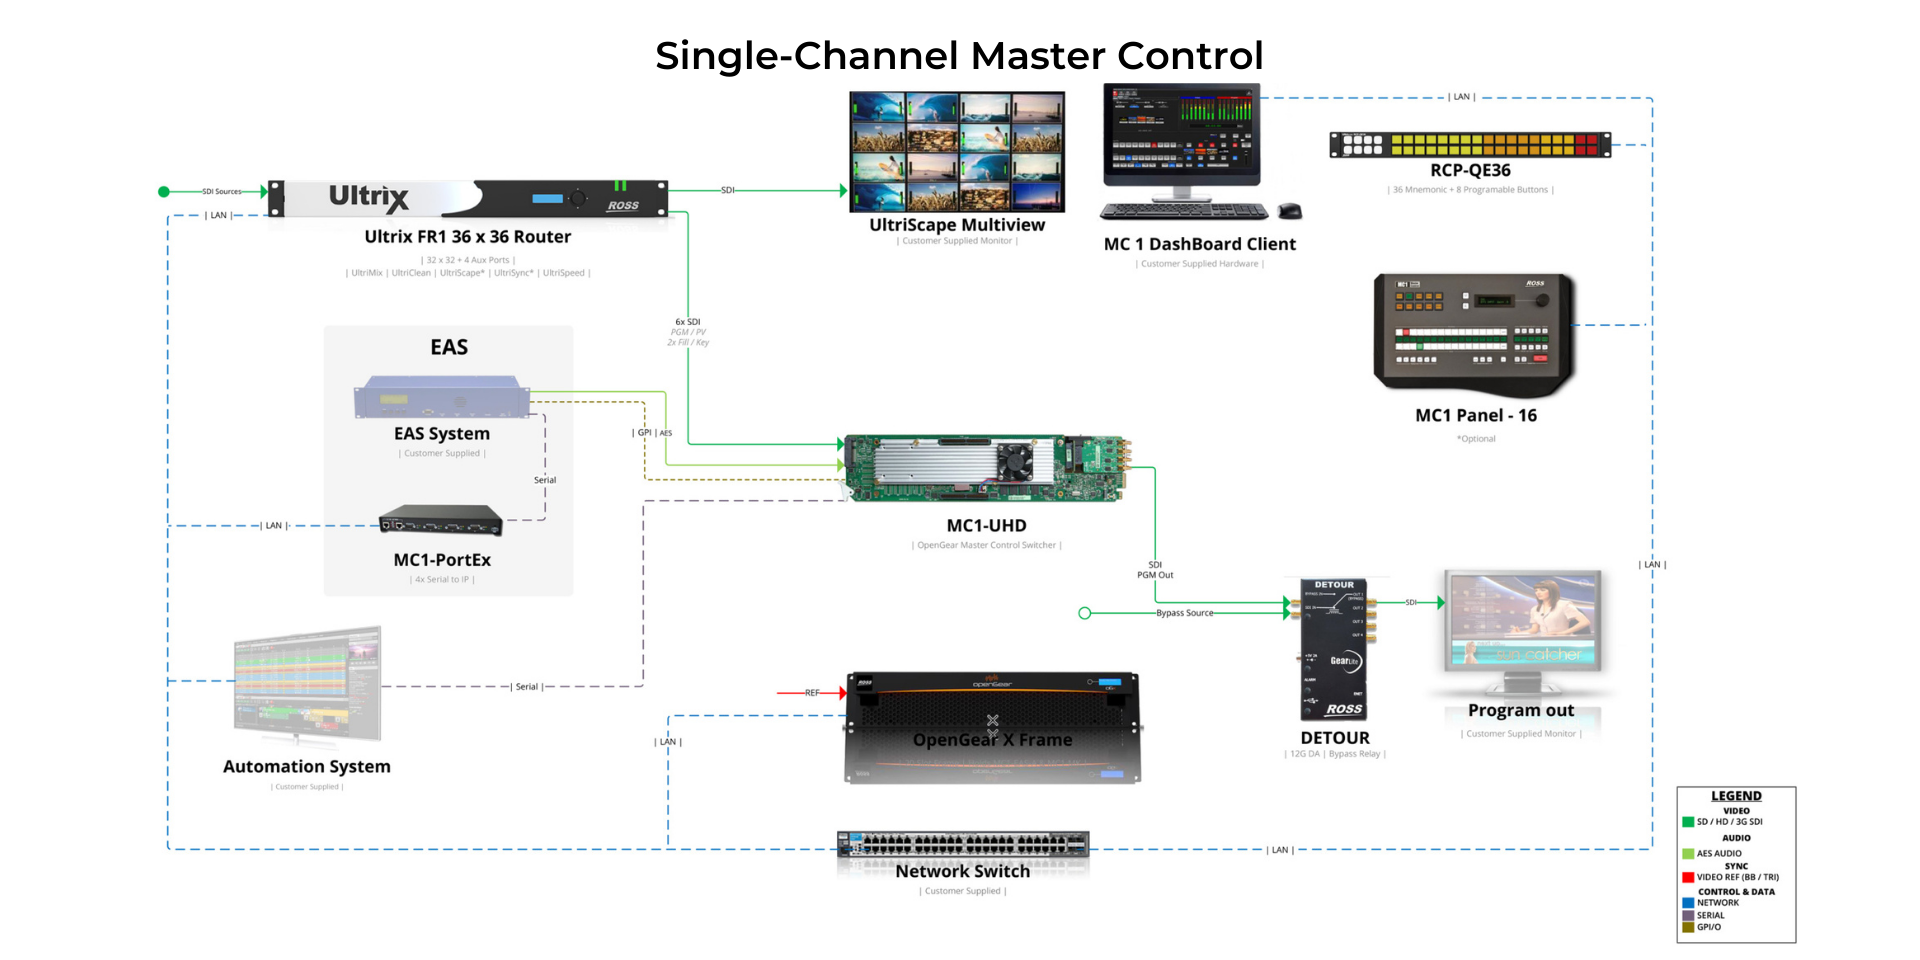 ROSS MASTER CONTROL SOLUTION - Single-Channel Master Control